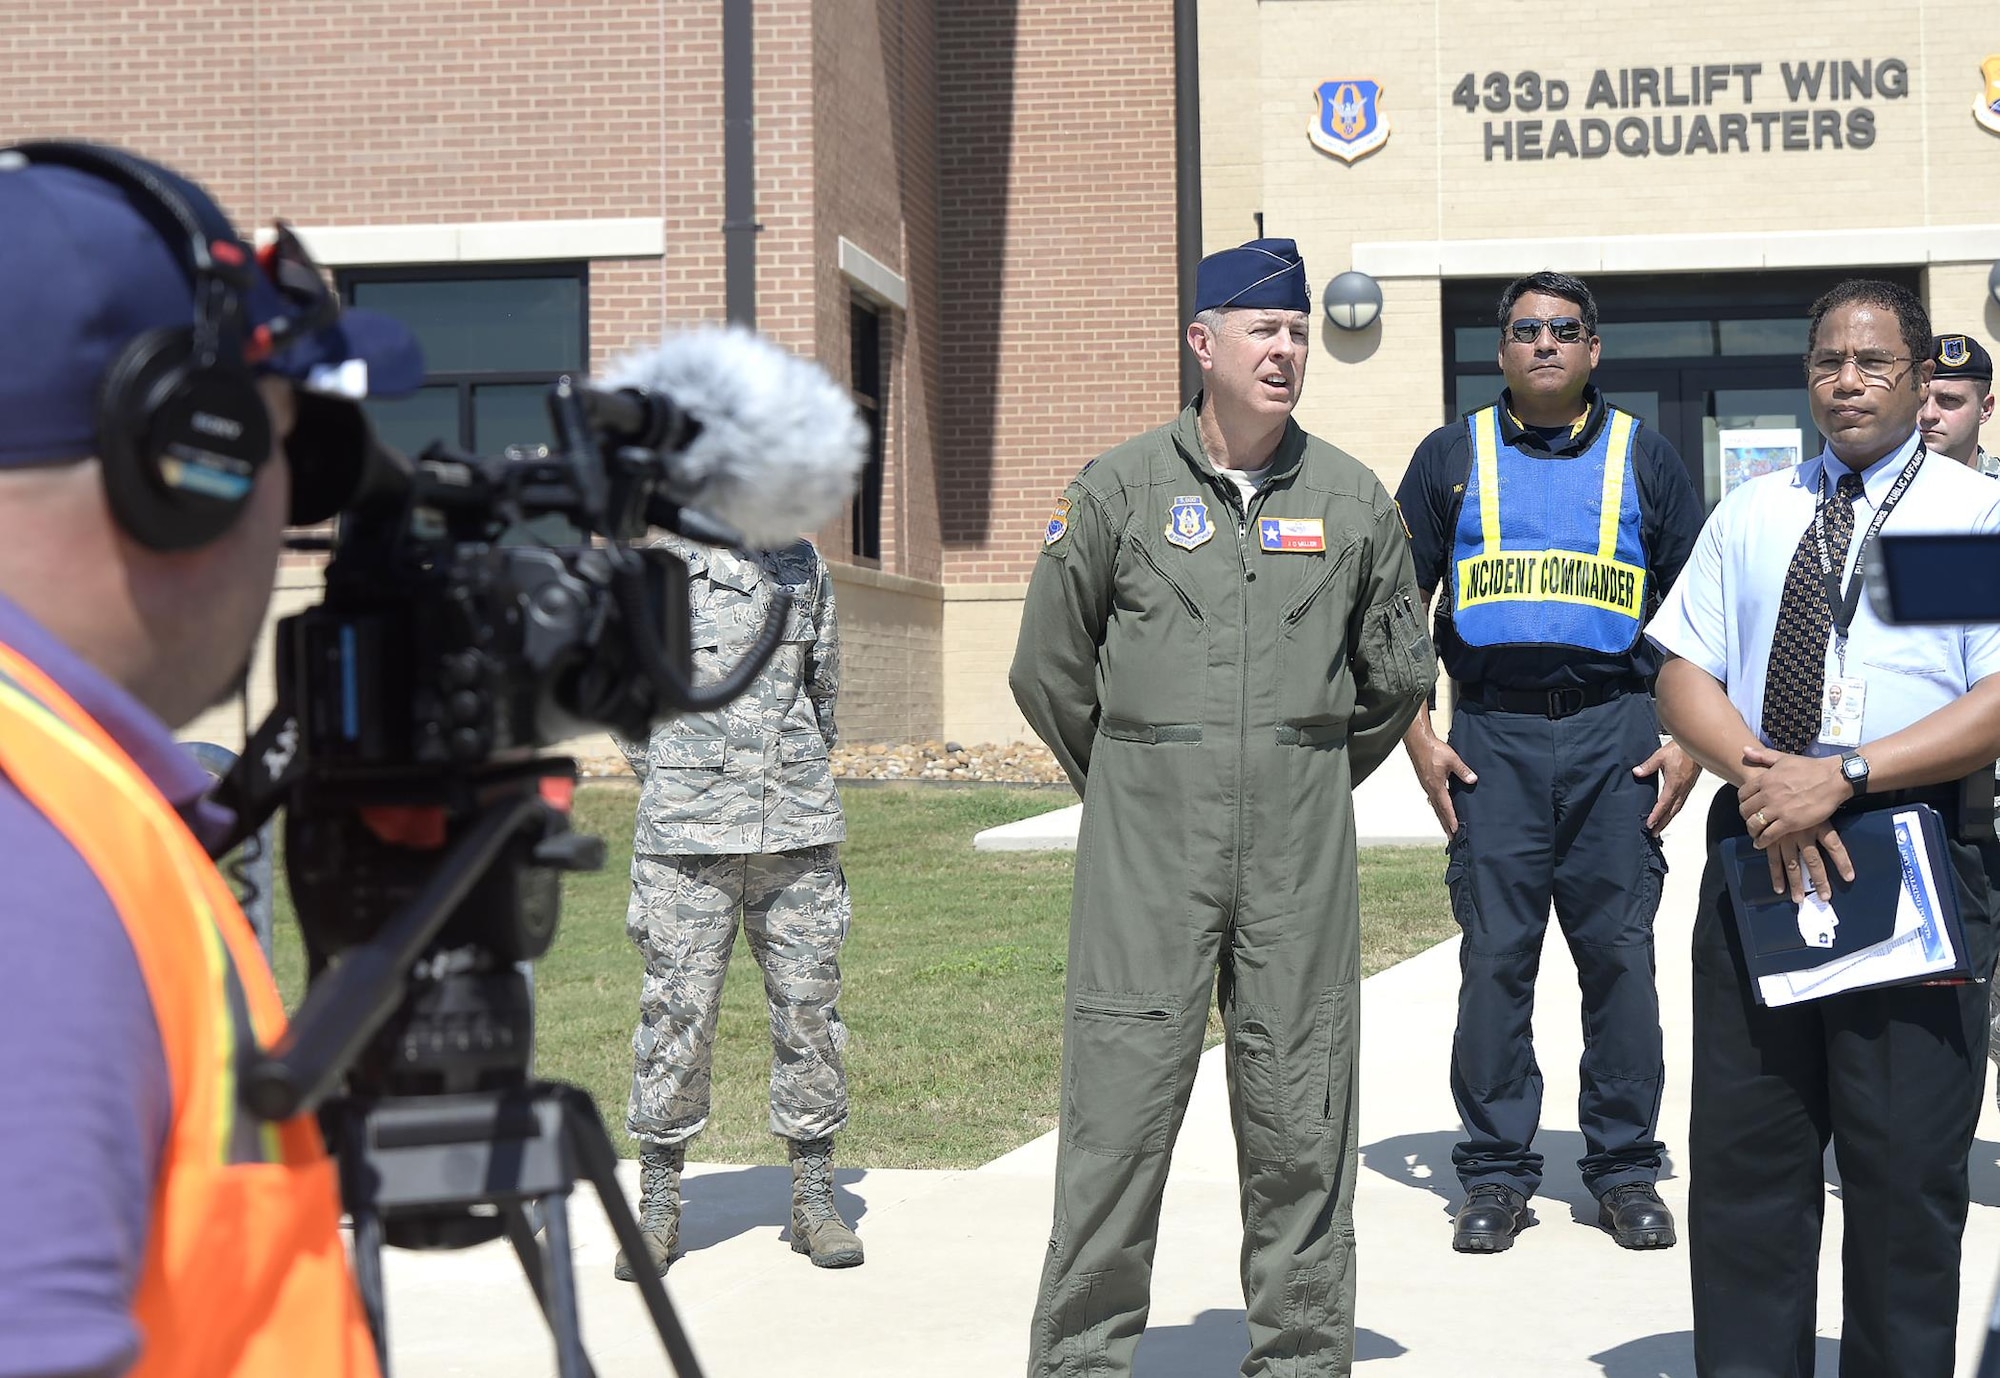 Lt.Col. James Miller, 433rd Operations Group deputy commander, answers questions from the media at a mock press conference Oct. 5, 2016 at Joint Base San Antonio-Lackland, Texas. The 502nd Air Base Wing, 433rd Airlift Wing, and 59th Medical Wing held a joint anti-hijacking exercise to evaluate emergency services reaction time to a real-world hijacking scenario. (U.S. Air Force photo by Benjamin Faske)